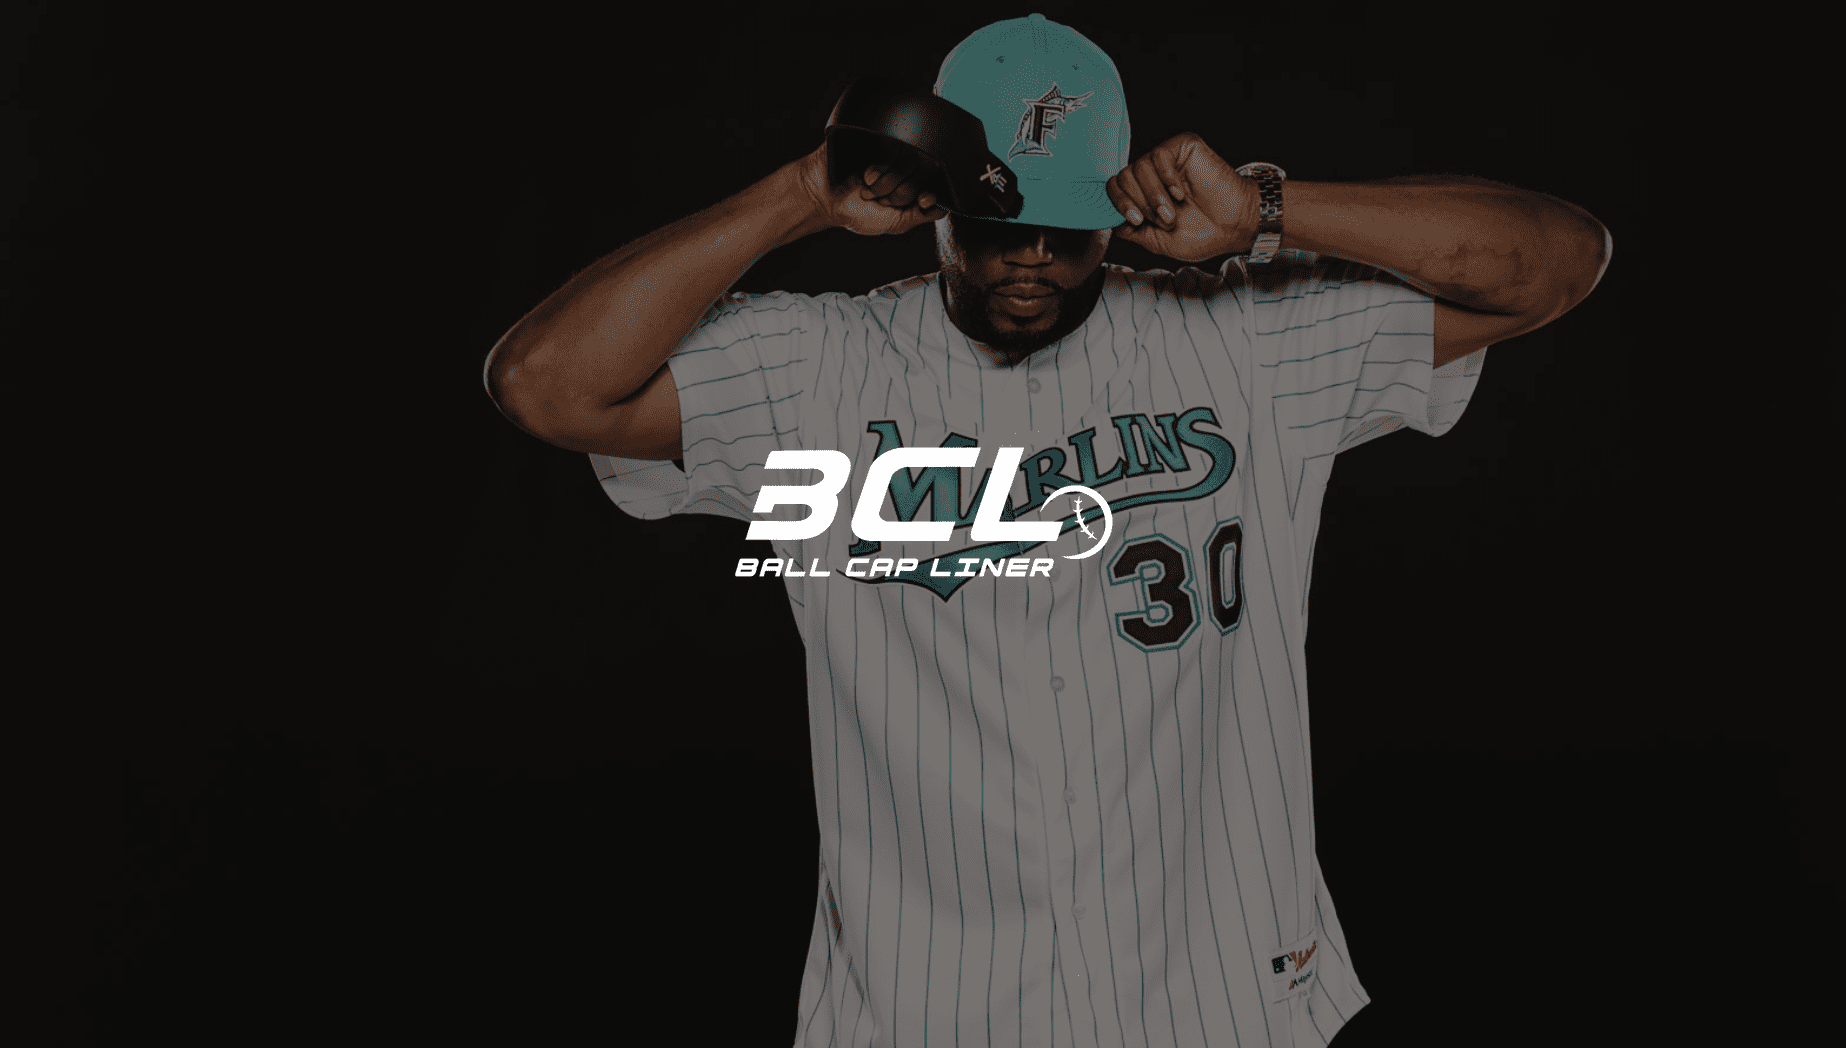 IU C&I Studios Page White BCL Ball Cap Liner logo against an African American man wearing a Marlins jersey and cap posing for the camera looking down adjusting his cap